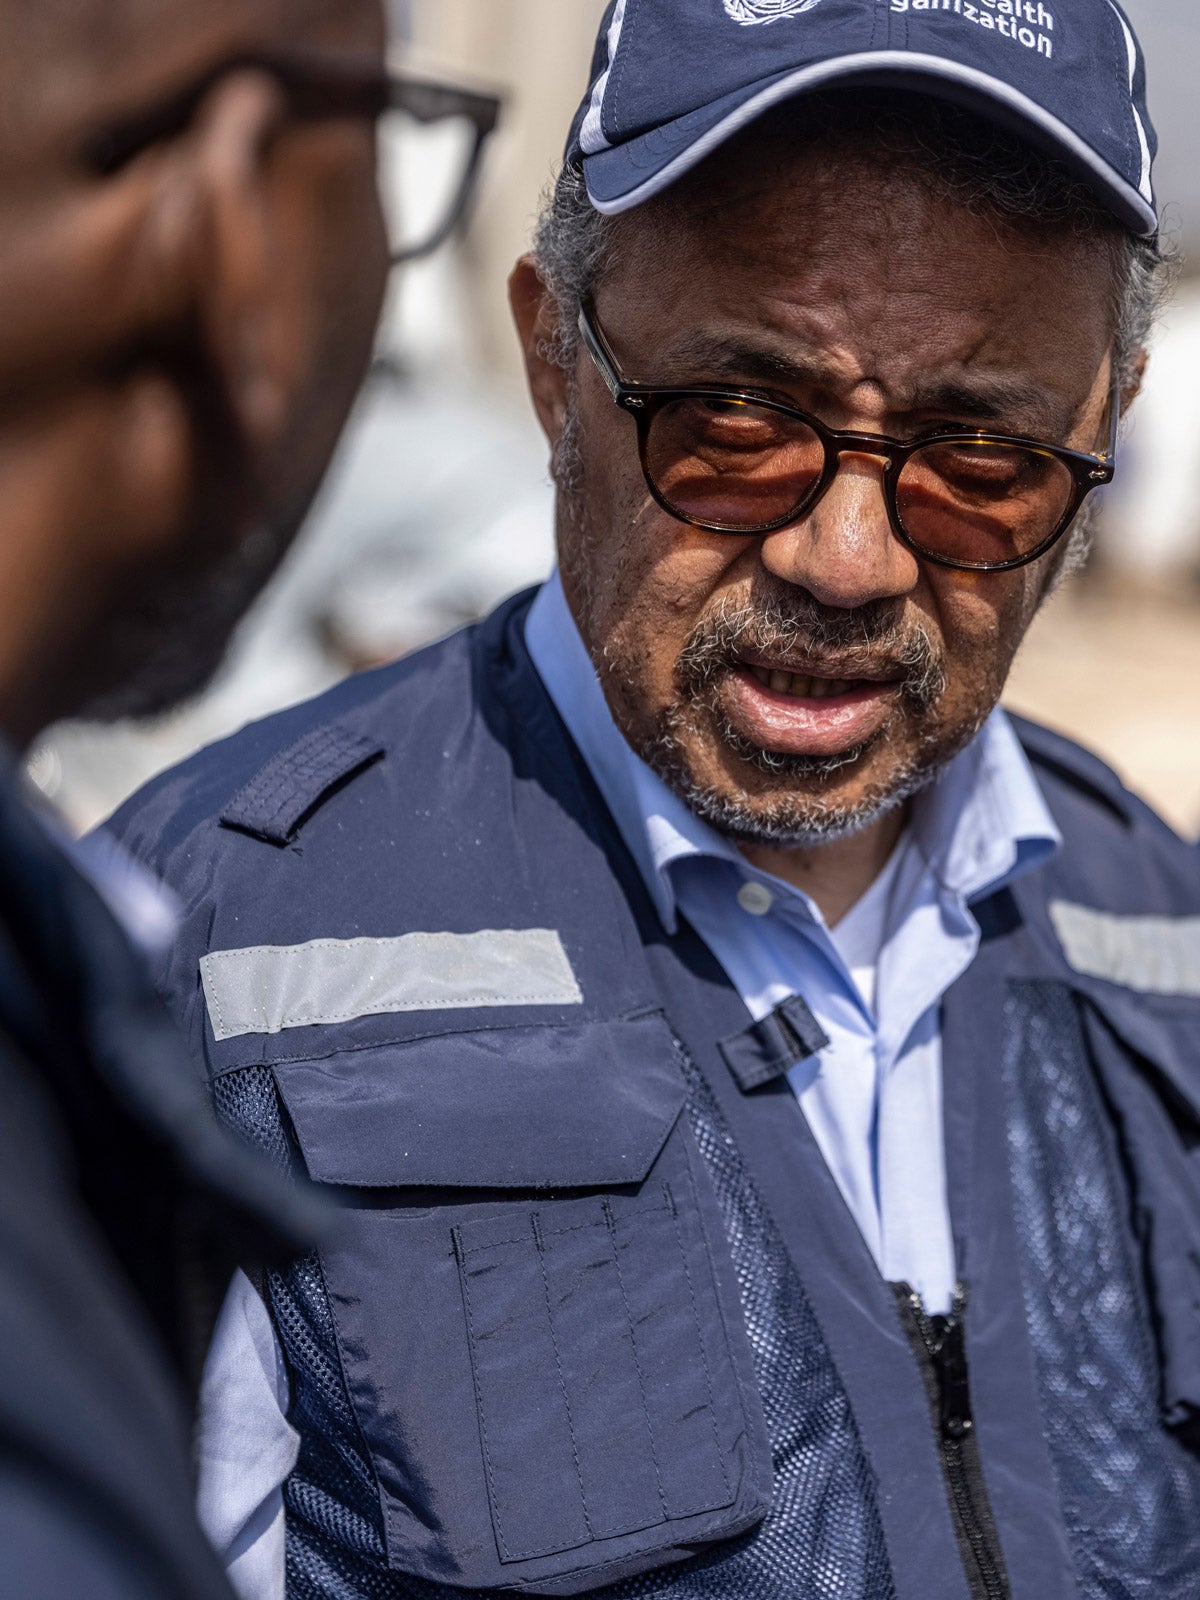 Director-General of the World Health Organization, Tedros Adhanom Ghebreyesus, wearing a dark blue World Health Organization (WHO) aid vest and hat speaks to a figure off-camera. He is standing outside at a border crossing near the Syran-Turkish border.